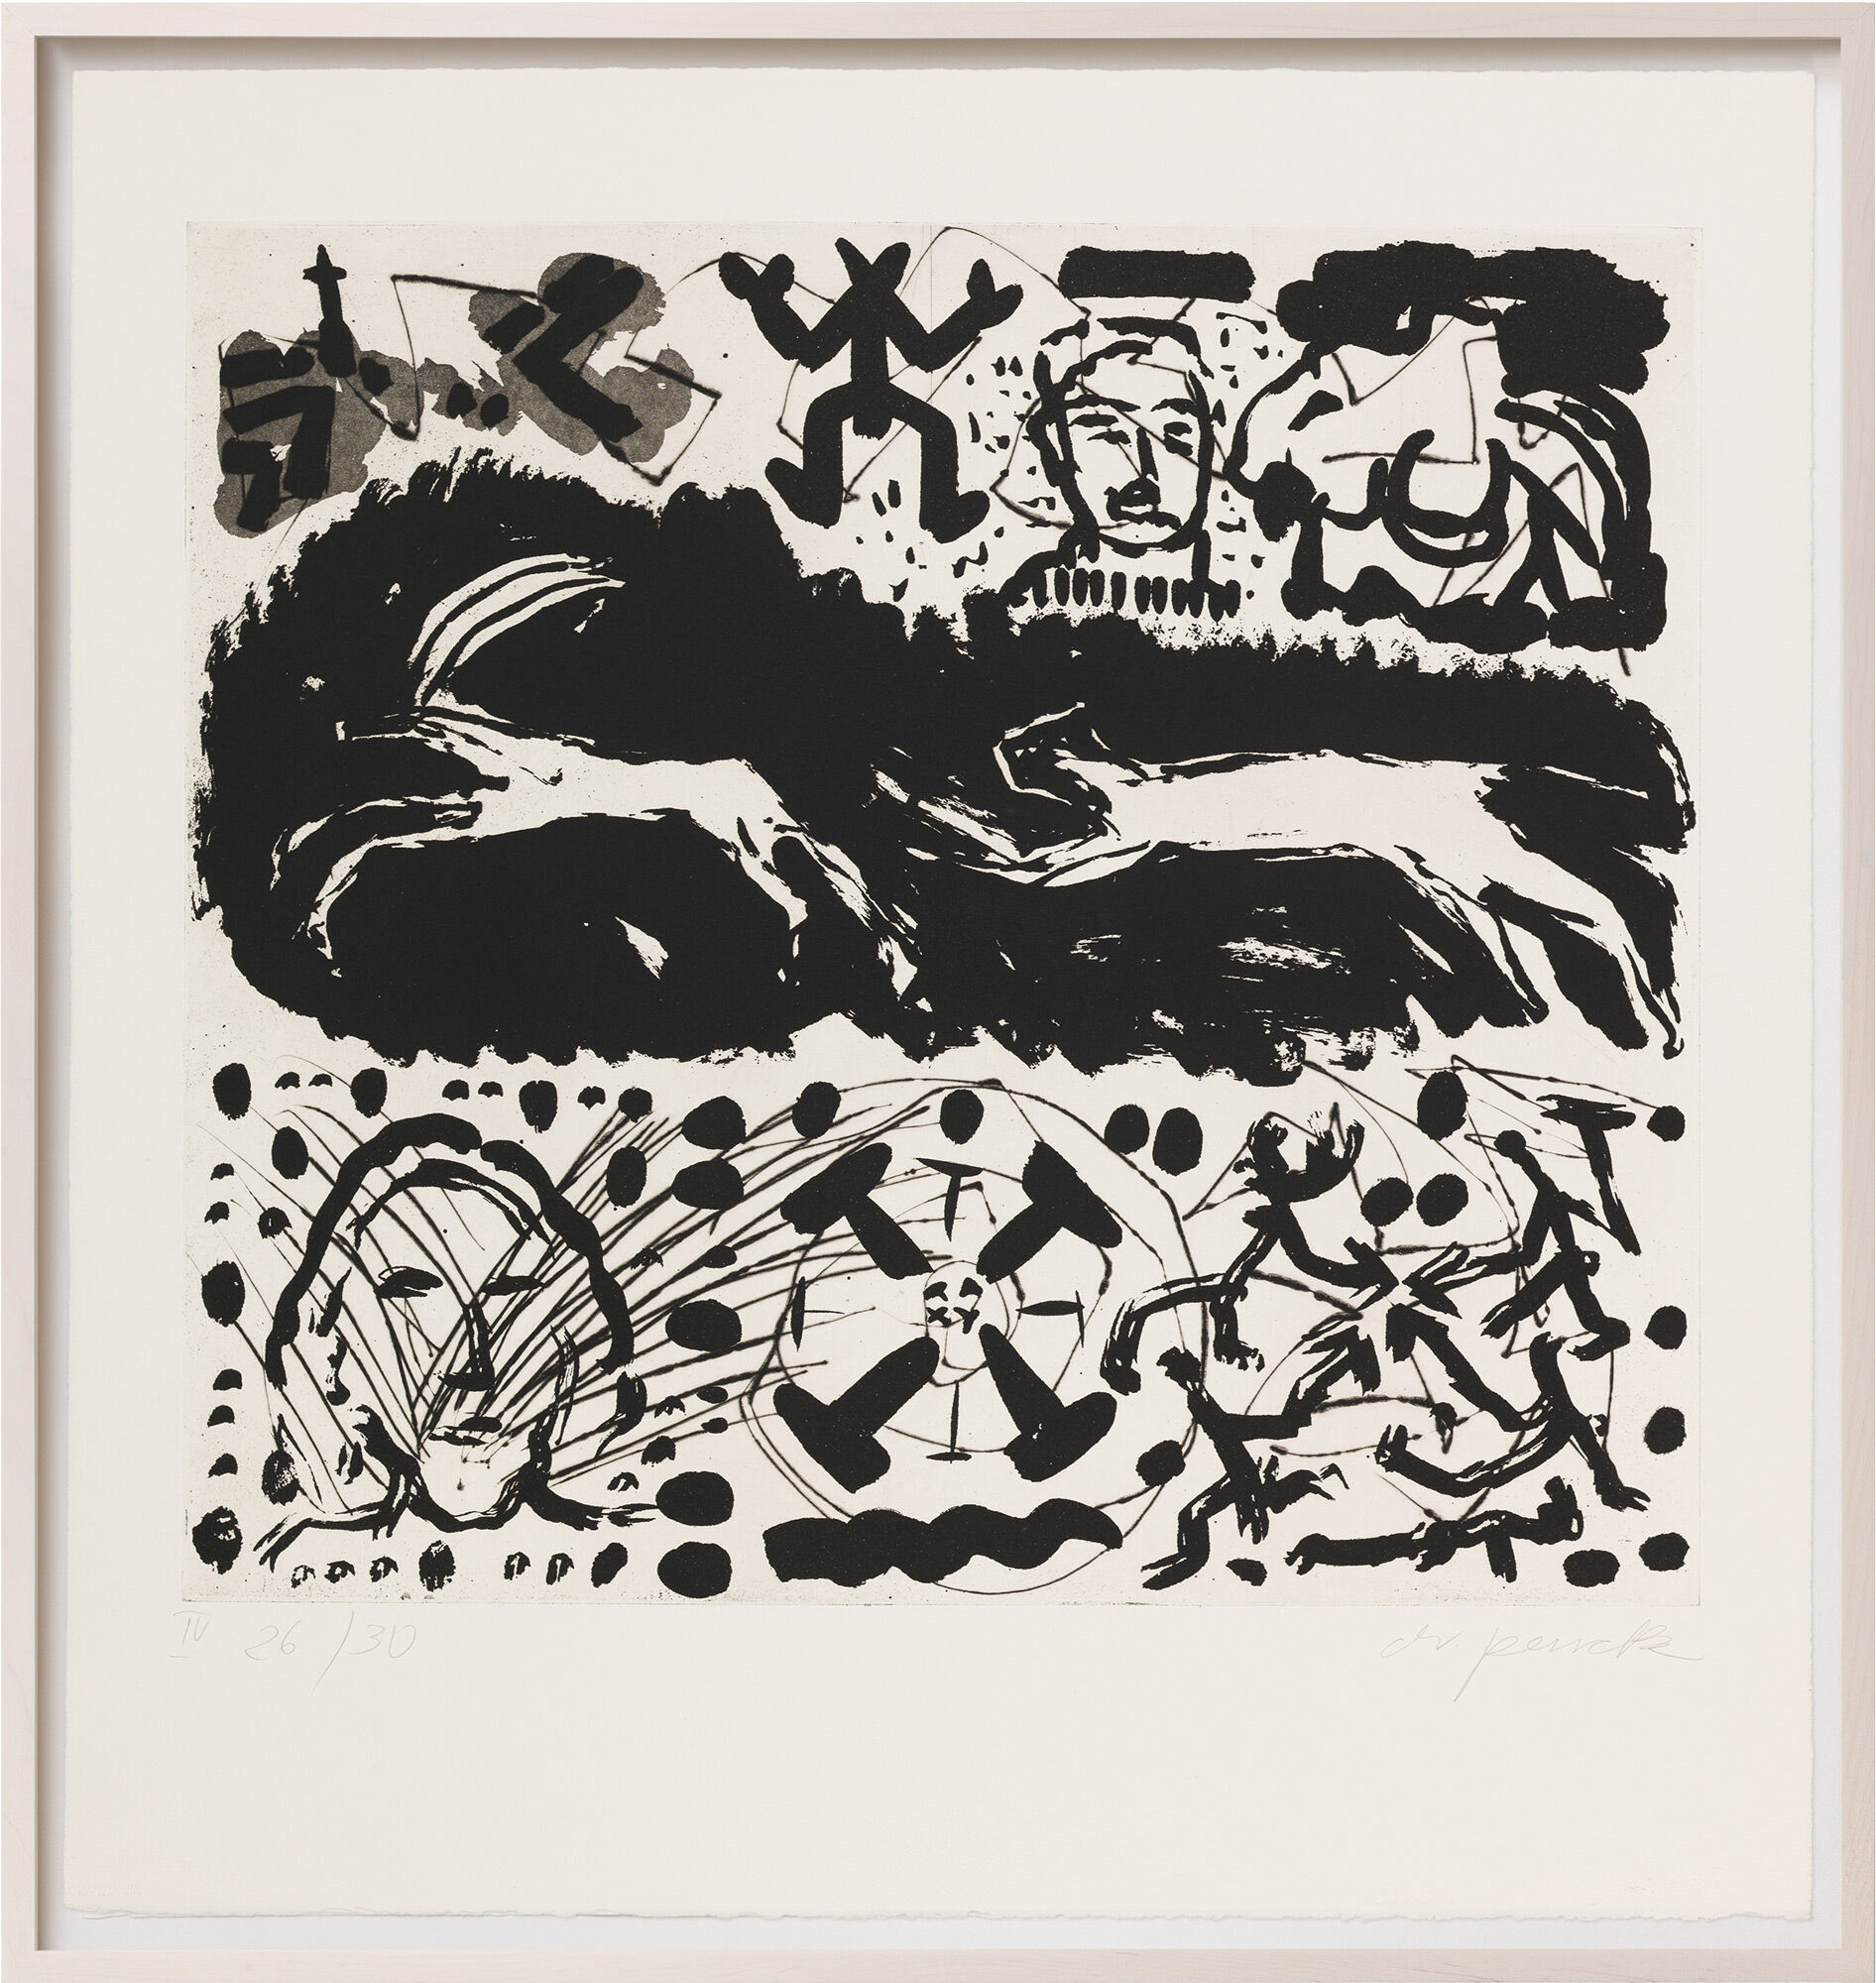 Picture "What Goes Through the Mind of an Emigrant - Panel IV" (1987) (Unique piece) by A. R. Penck